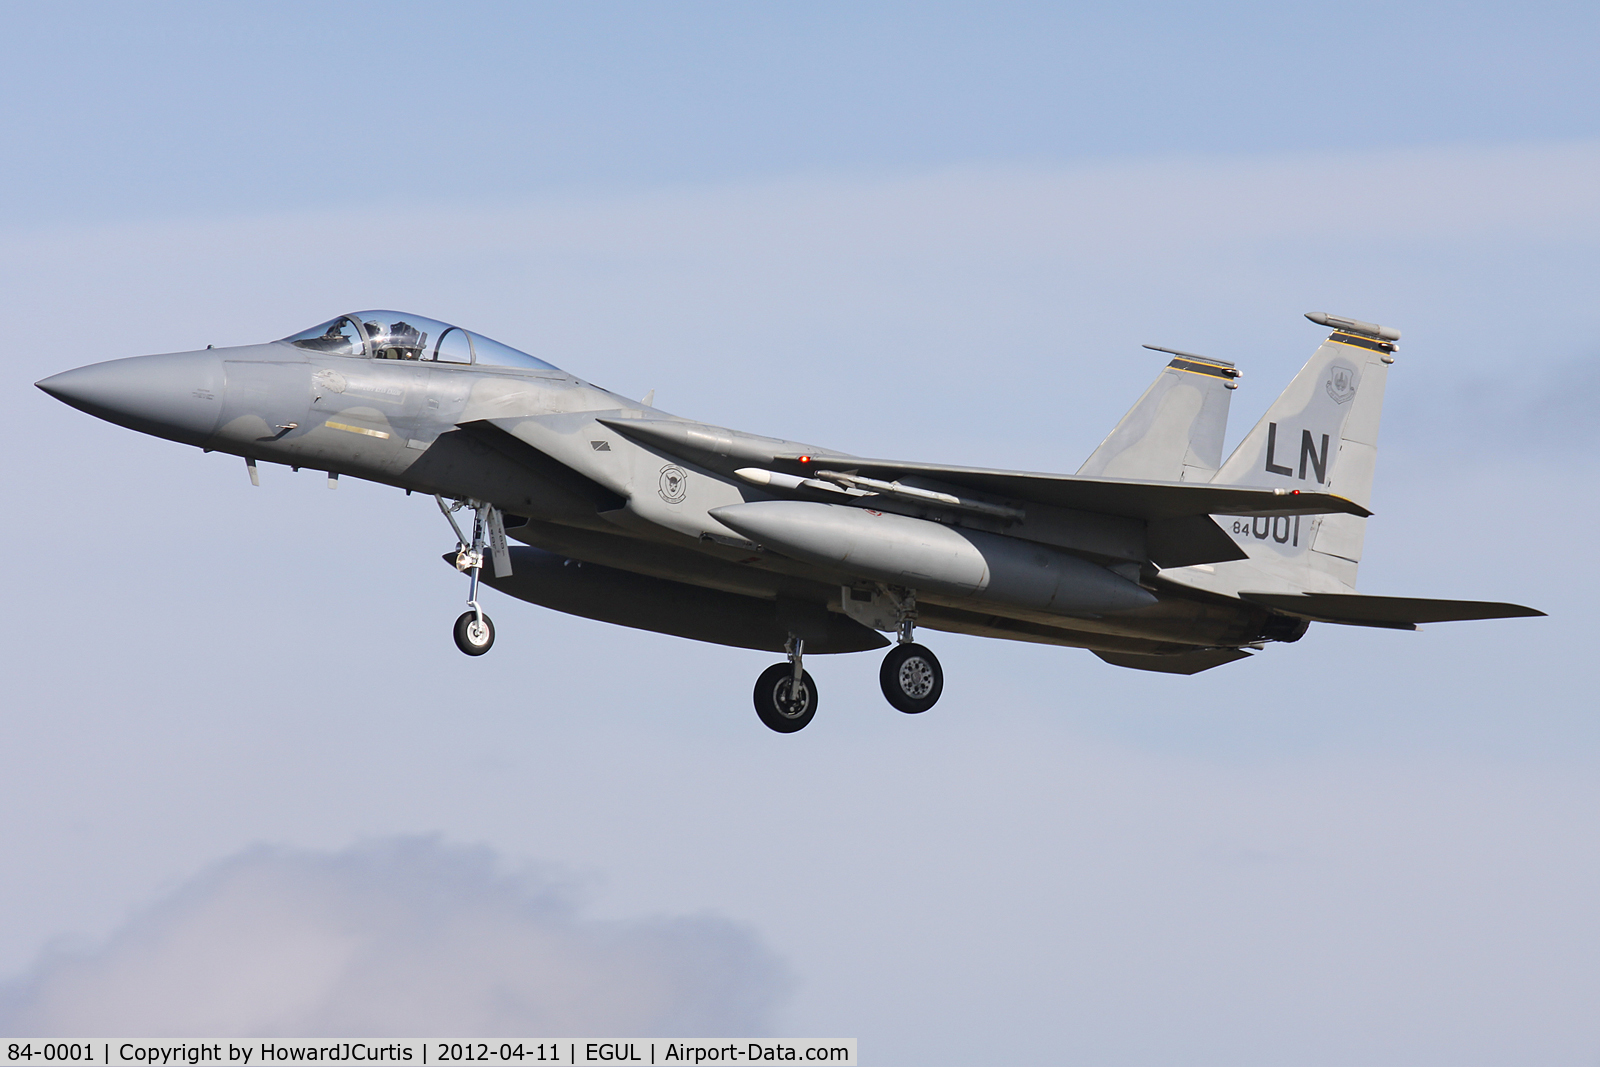 84-0001, 1984 McDonnell Douglas F-15C Eagle C/N 0908/C304, Coming in to land.